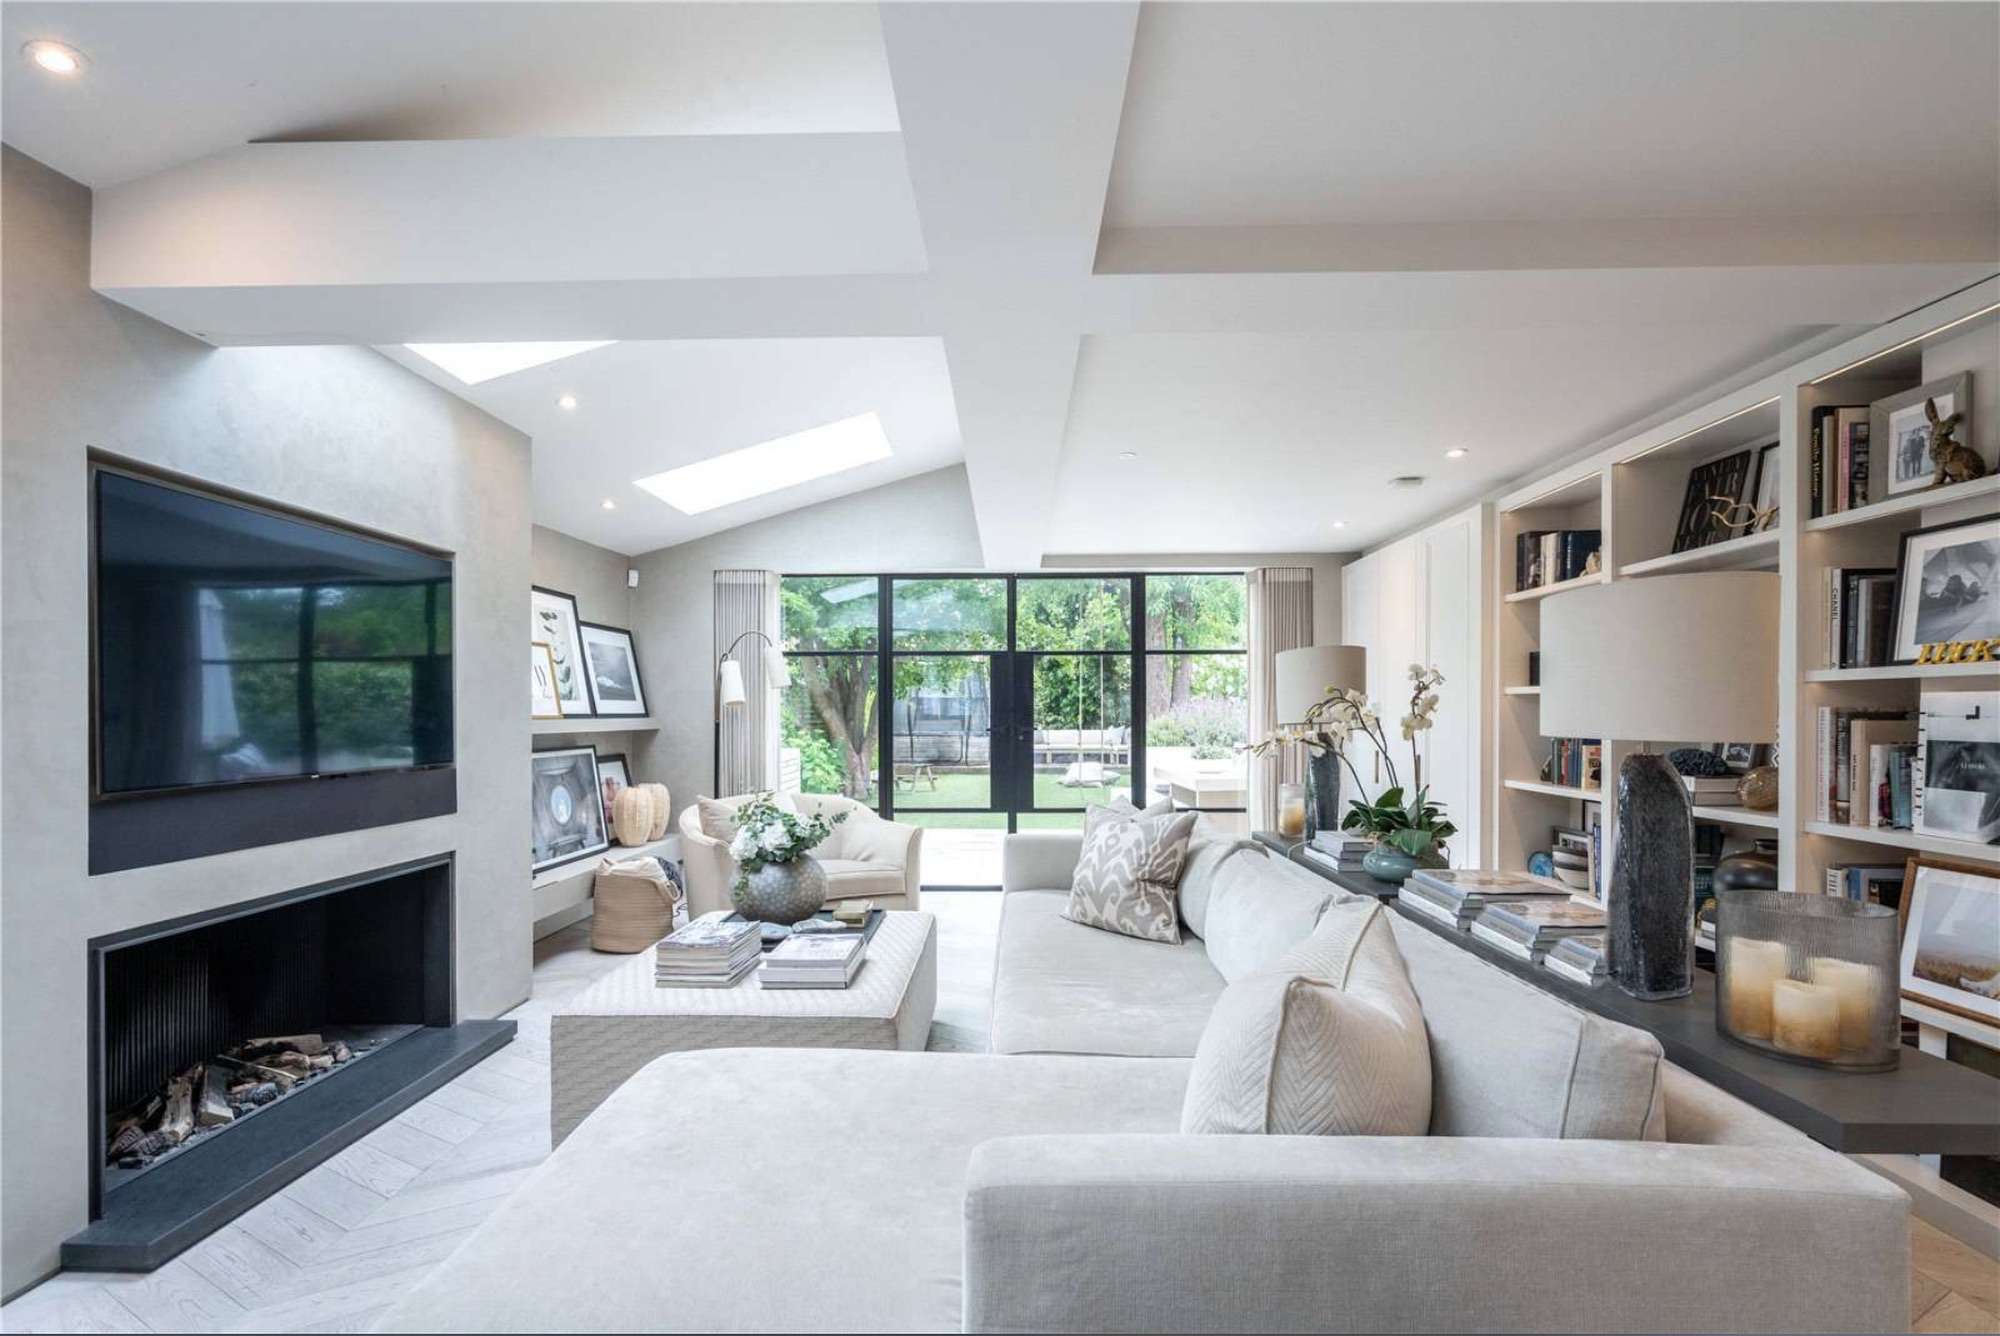 Wimbledon SW19 - Contemporary interiors arranged over three floors. The house is suitable for fashion and home accessories shoots - The Location Guys